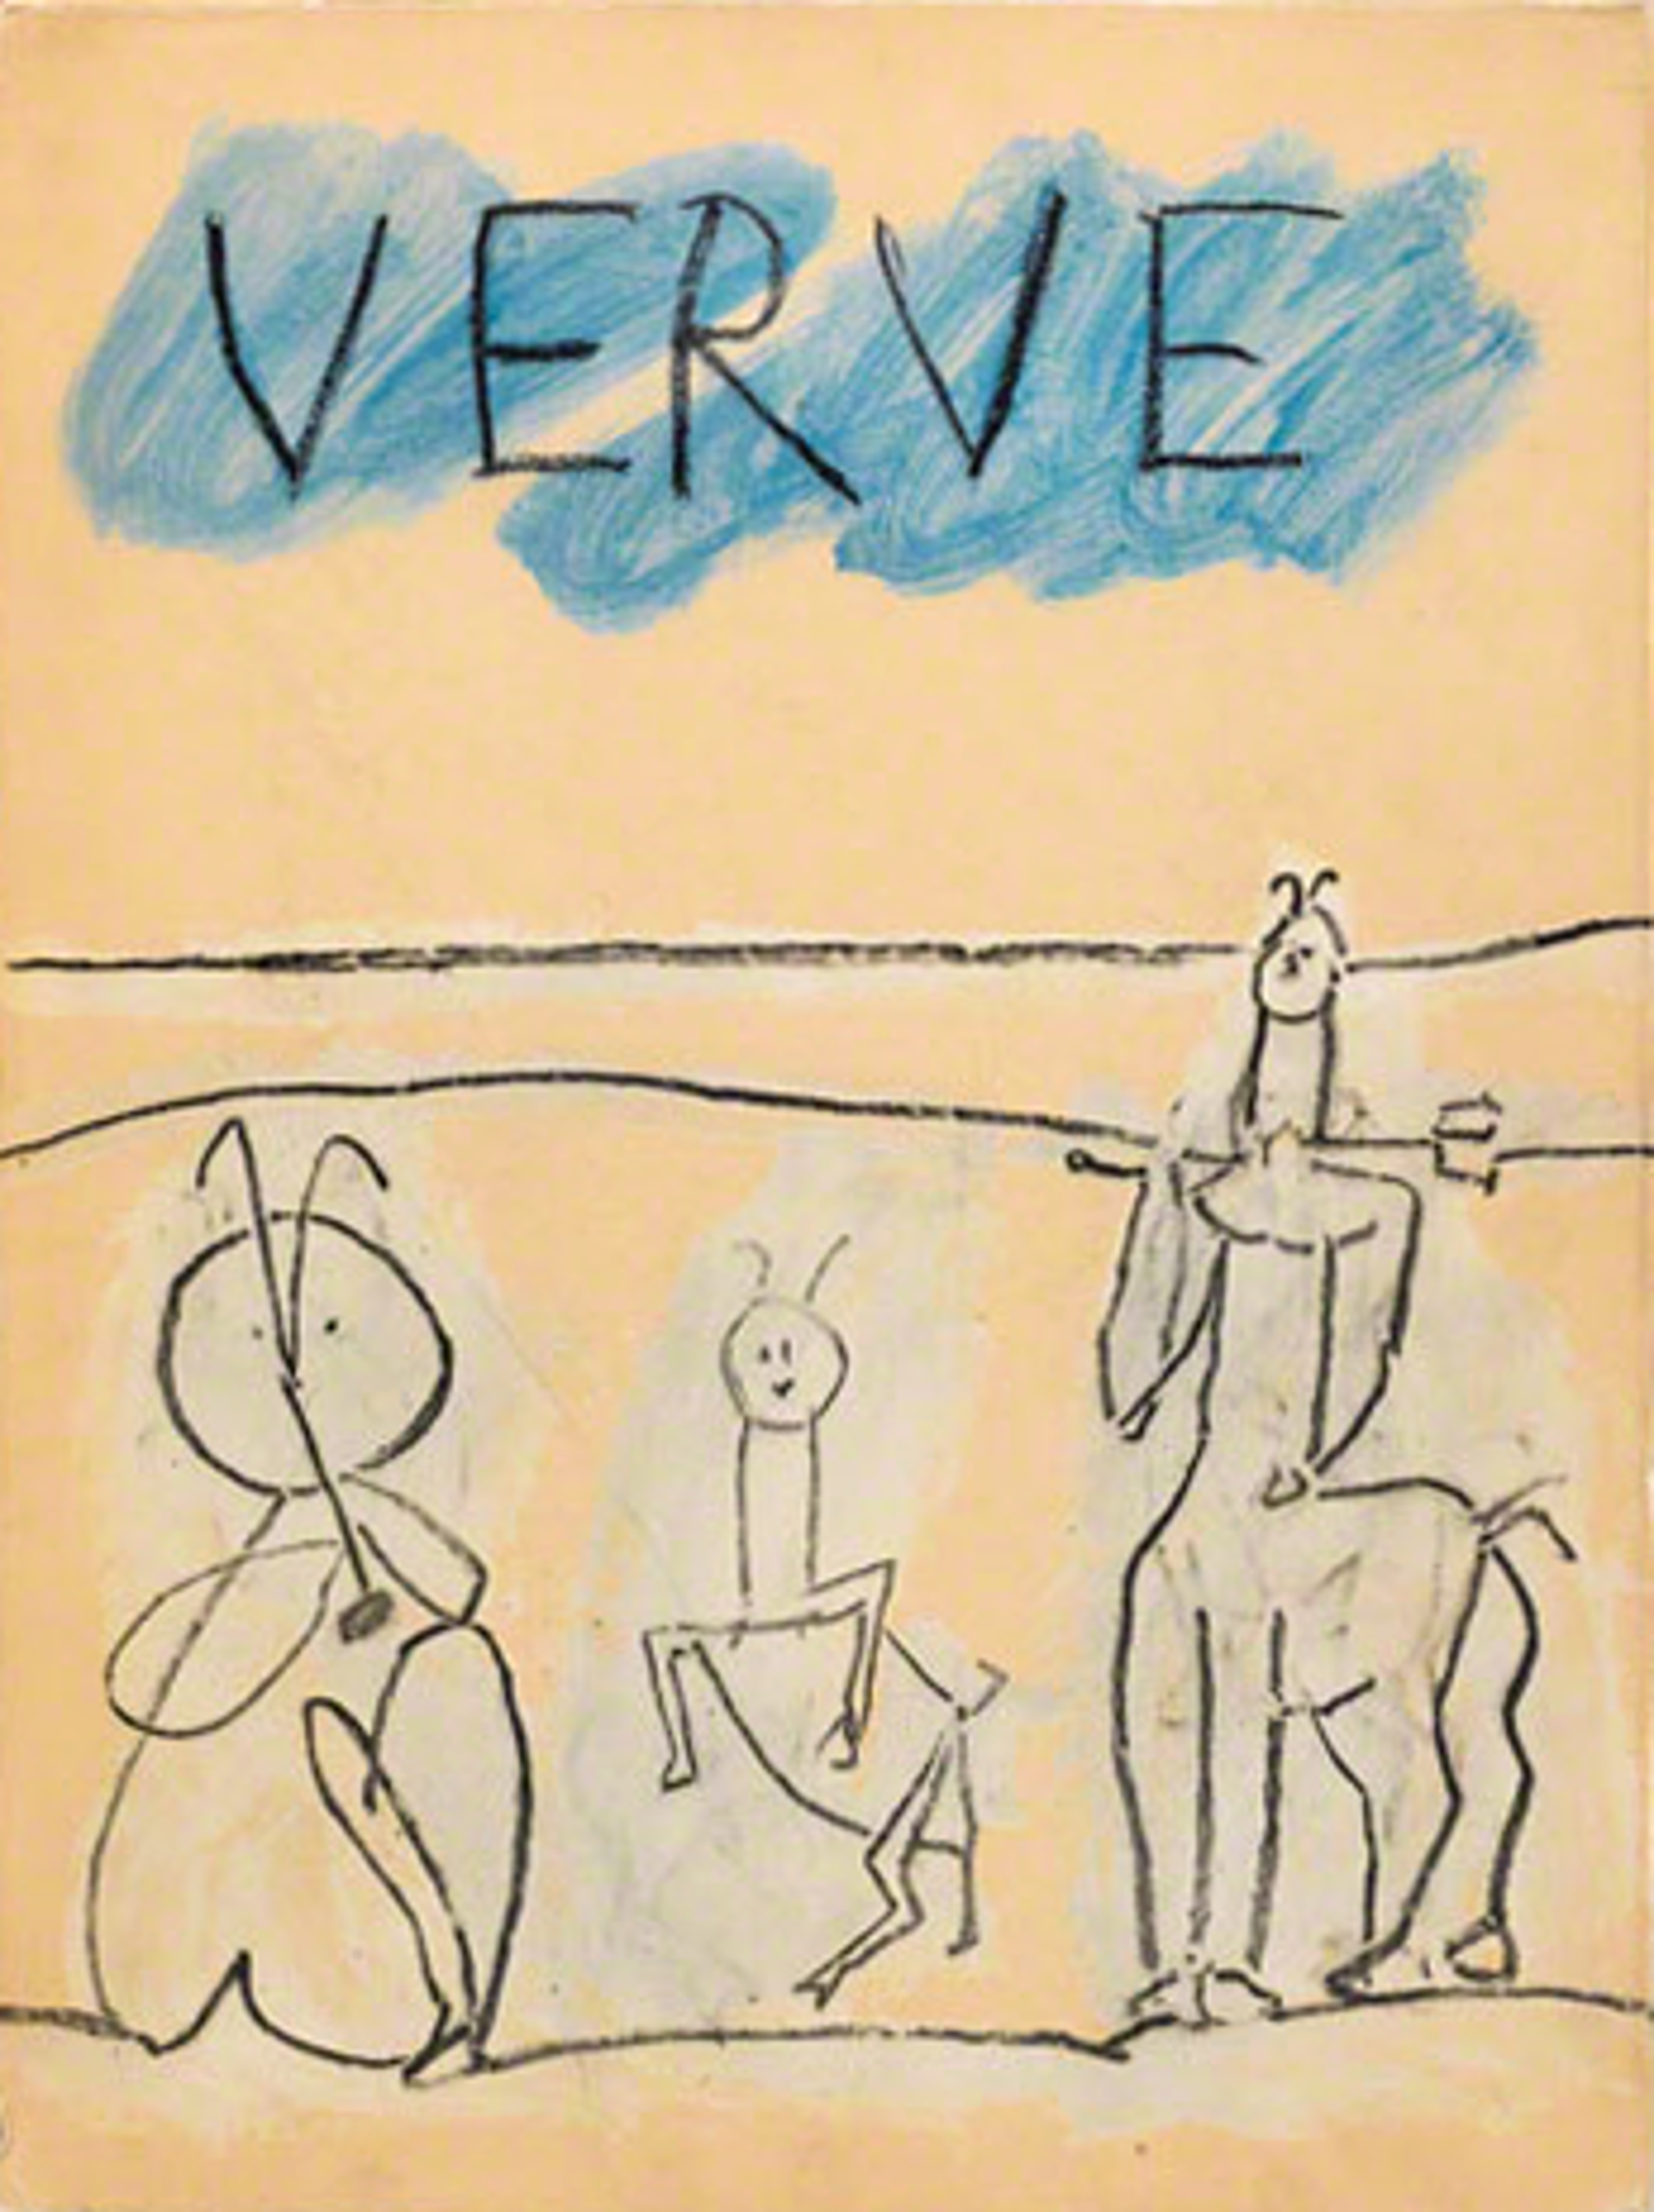 Picasso: Verve by European